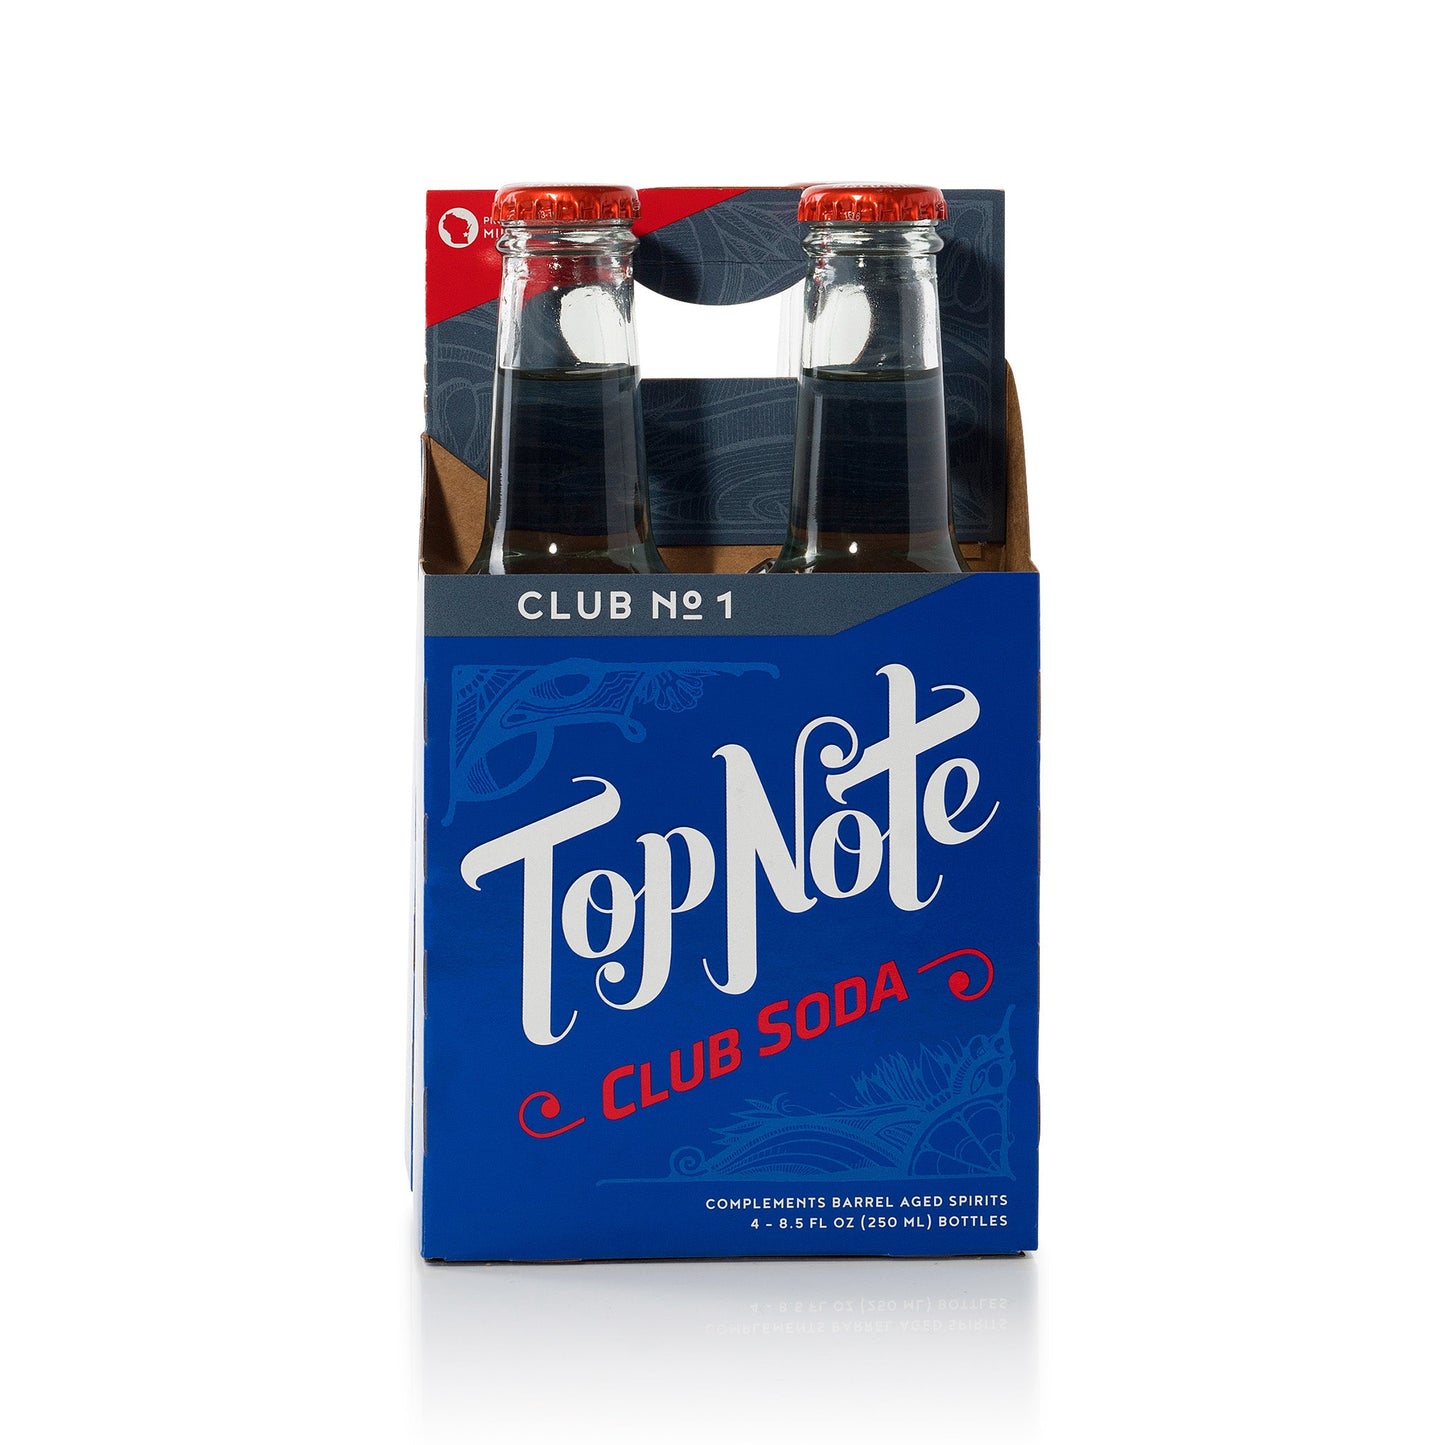 Club Soda No. 1 by Top Note Tonic Store